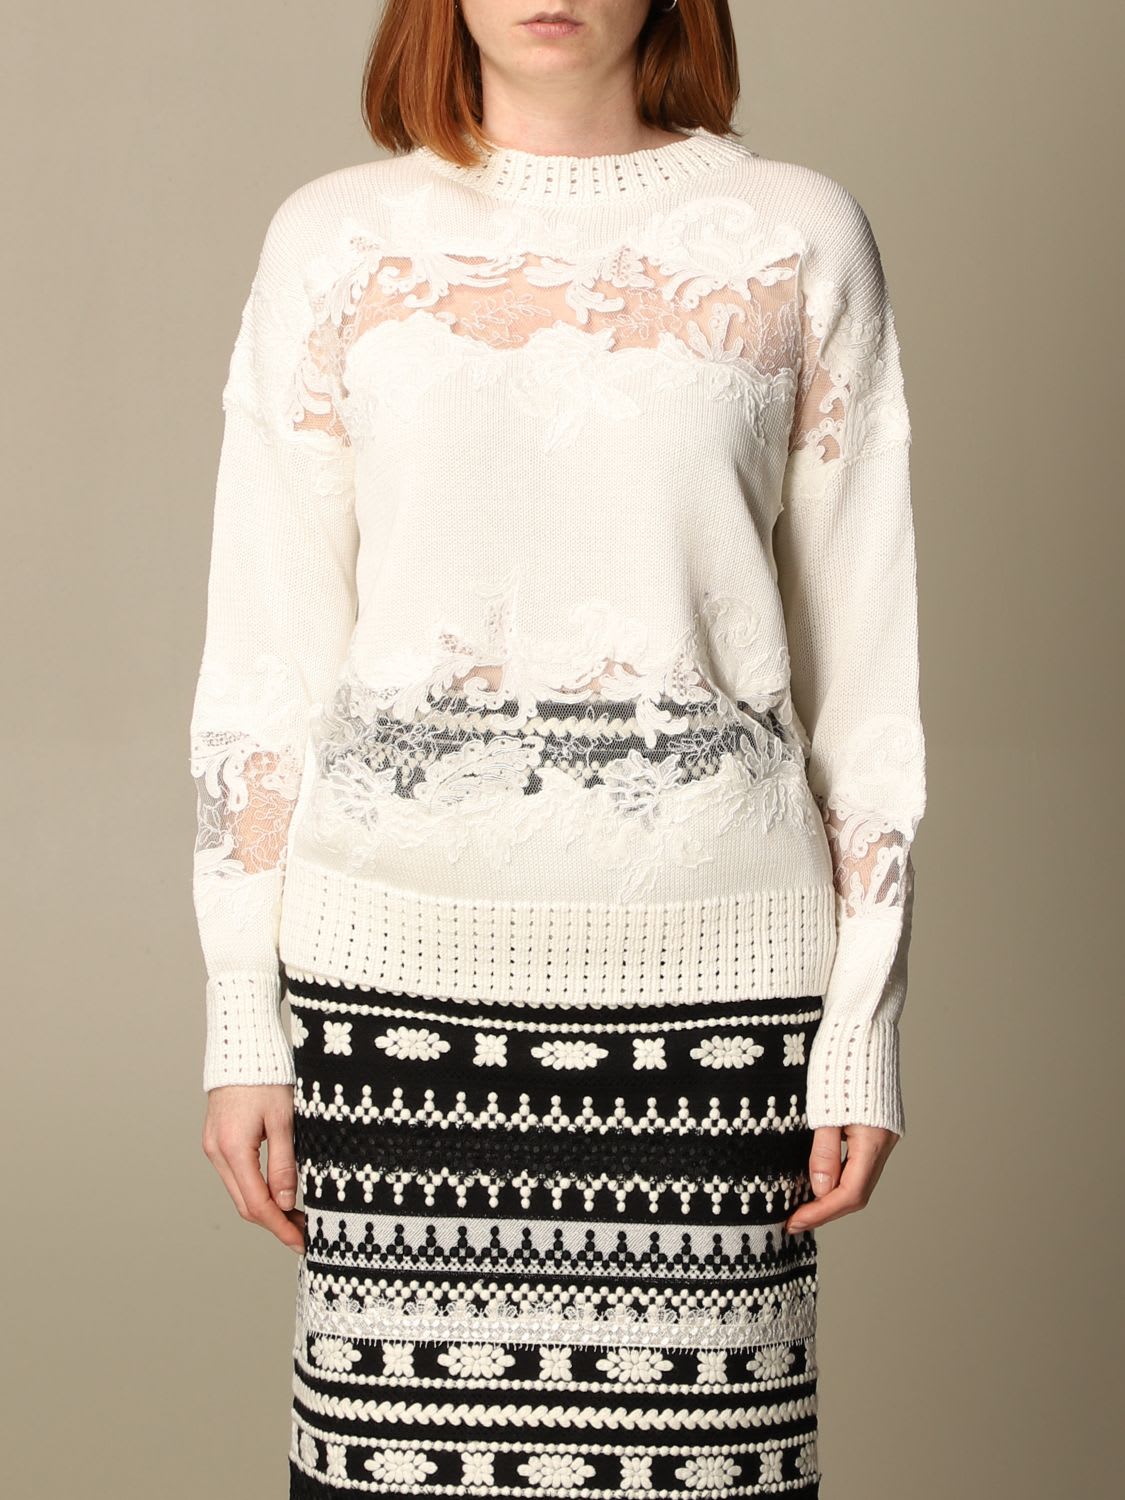 Ermanno Scervino Sweater Ermanno Scervino Sweater With Lace Inserts